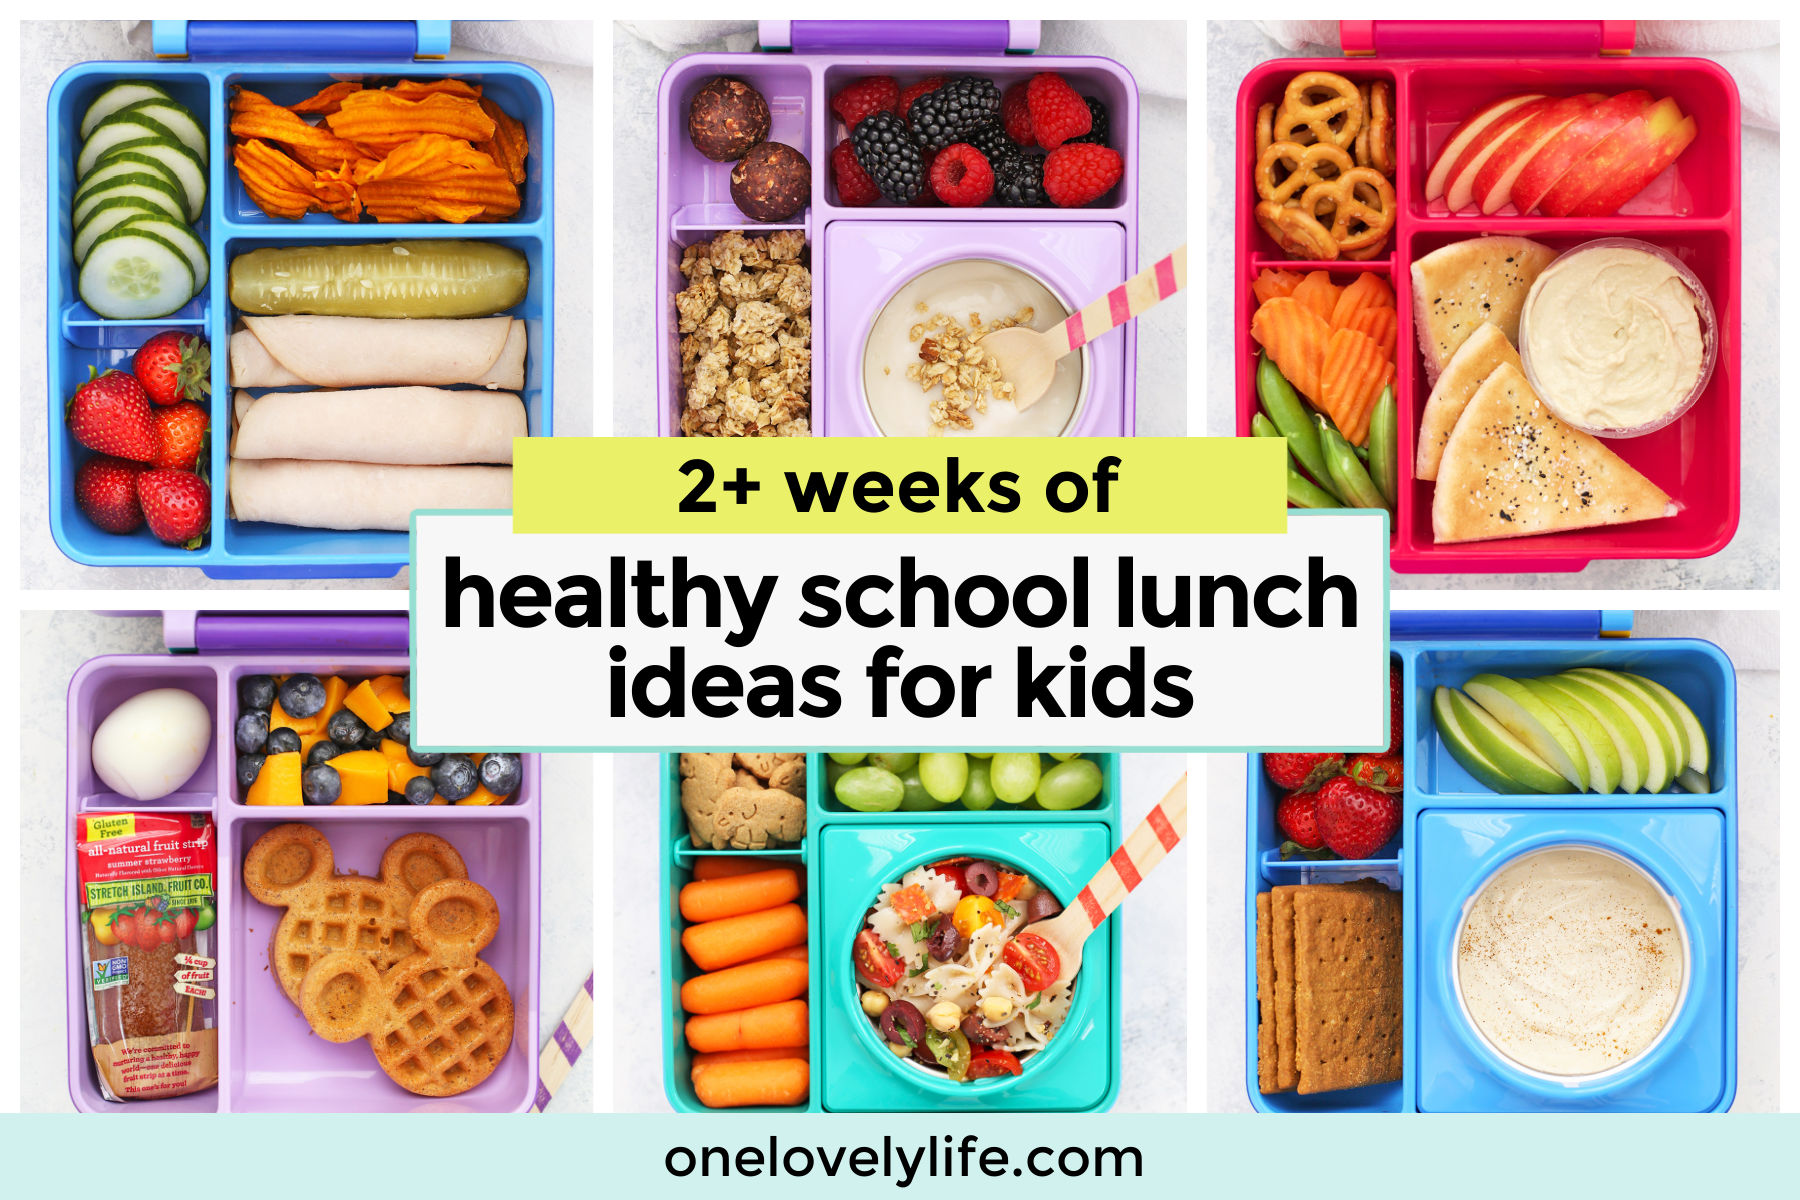 https://www.onelovelylife.com/wp-content/uploads/2020/08/2-Weeks-of-Lunches-Screenshot1B.jpg